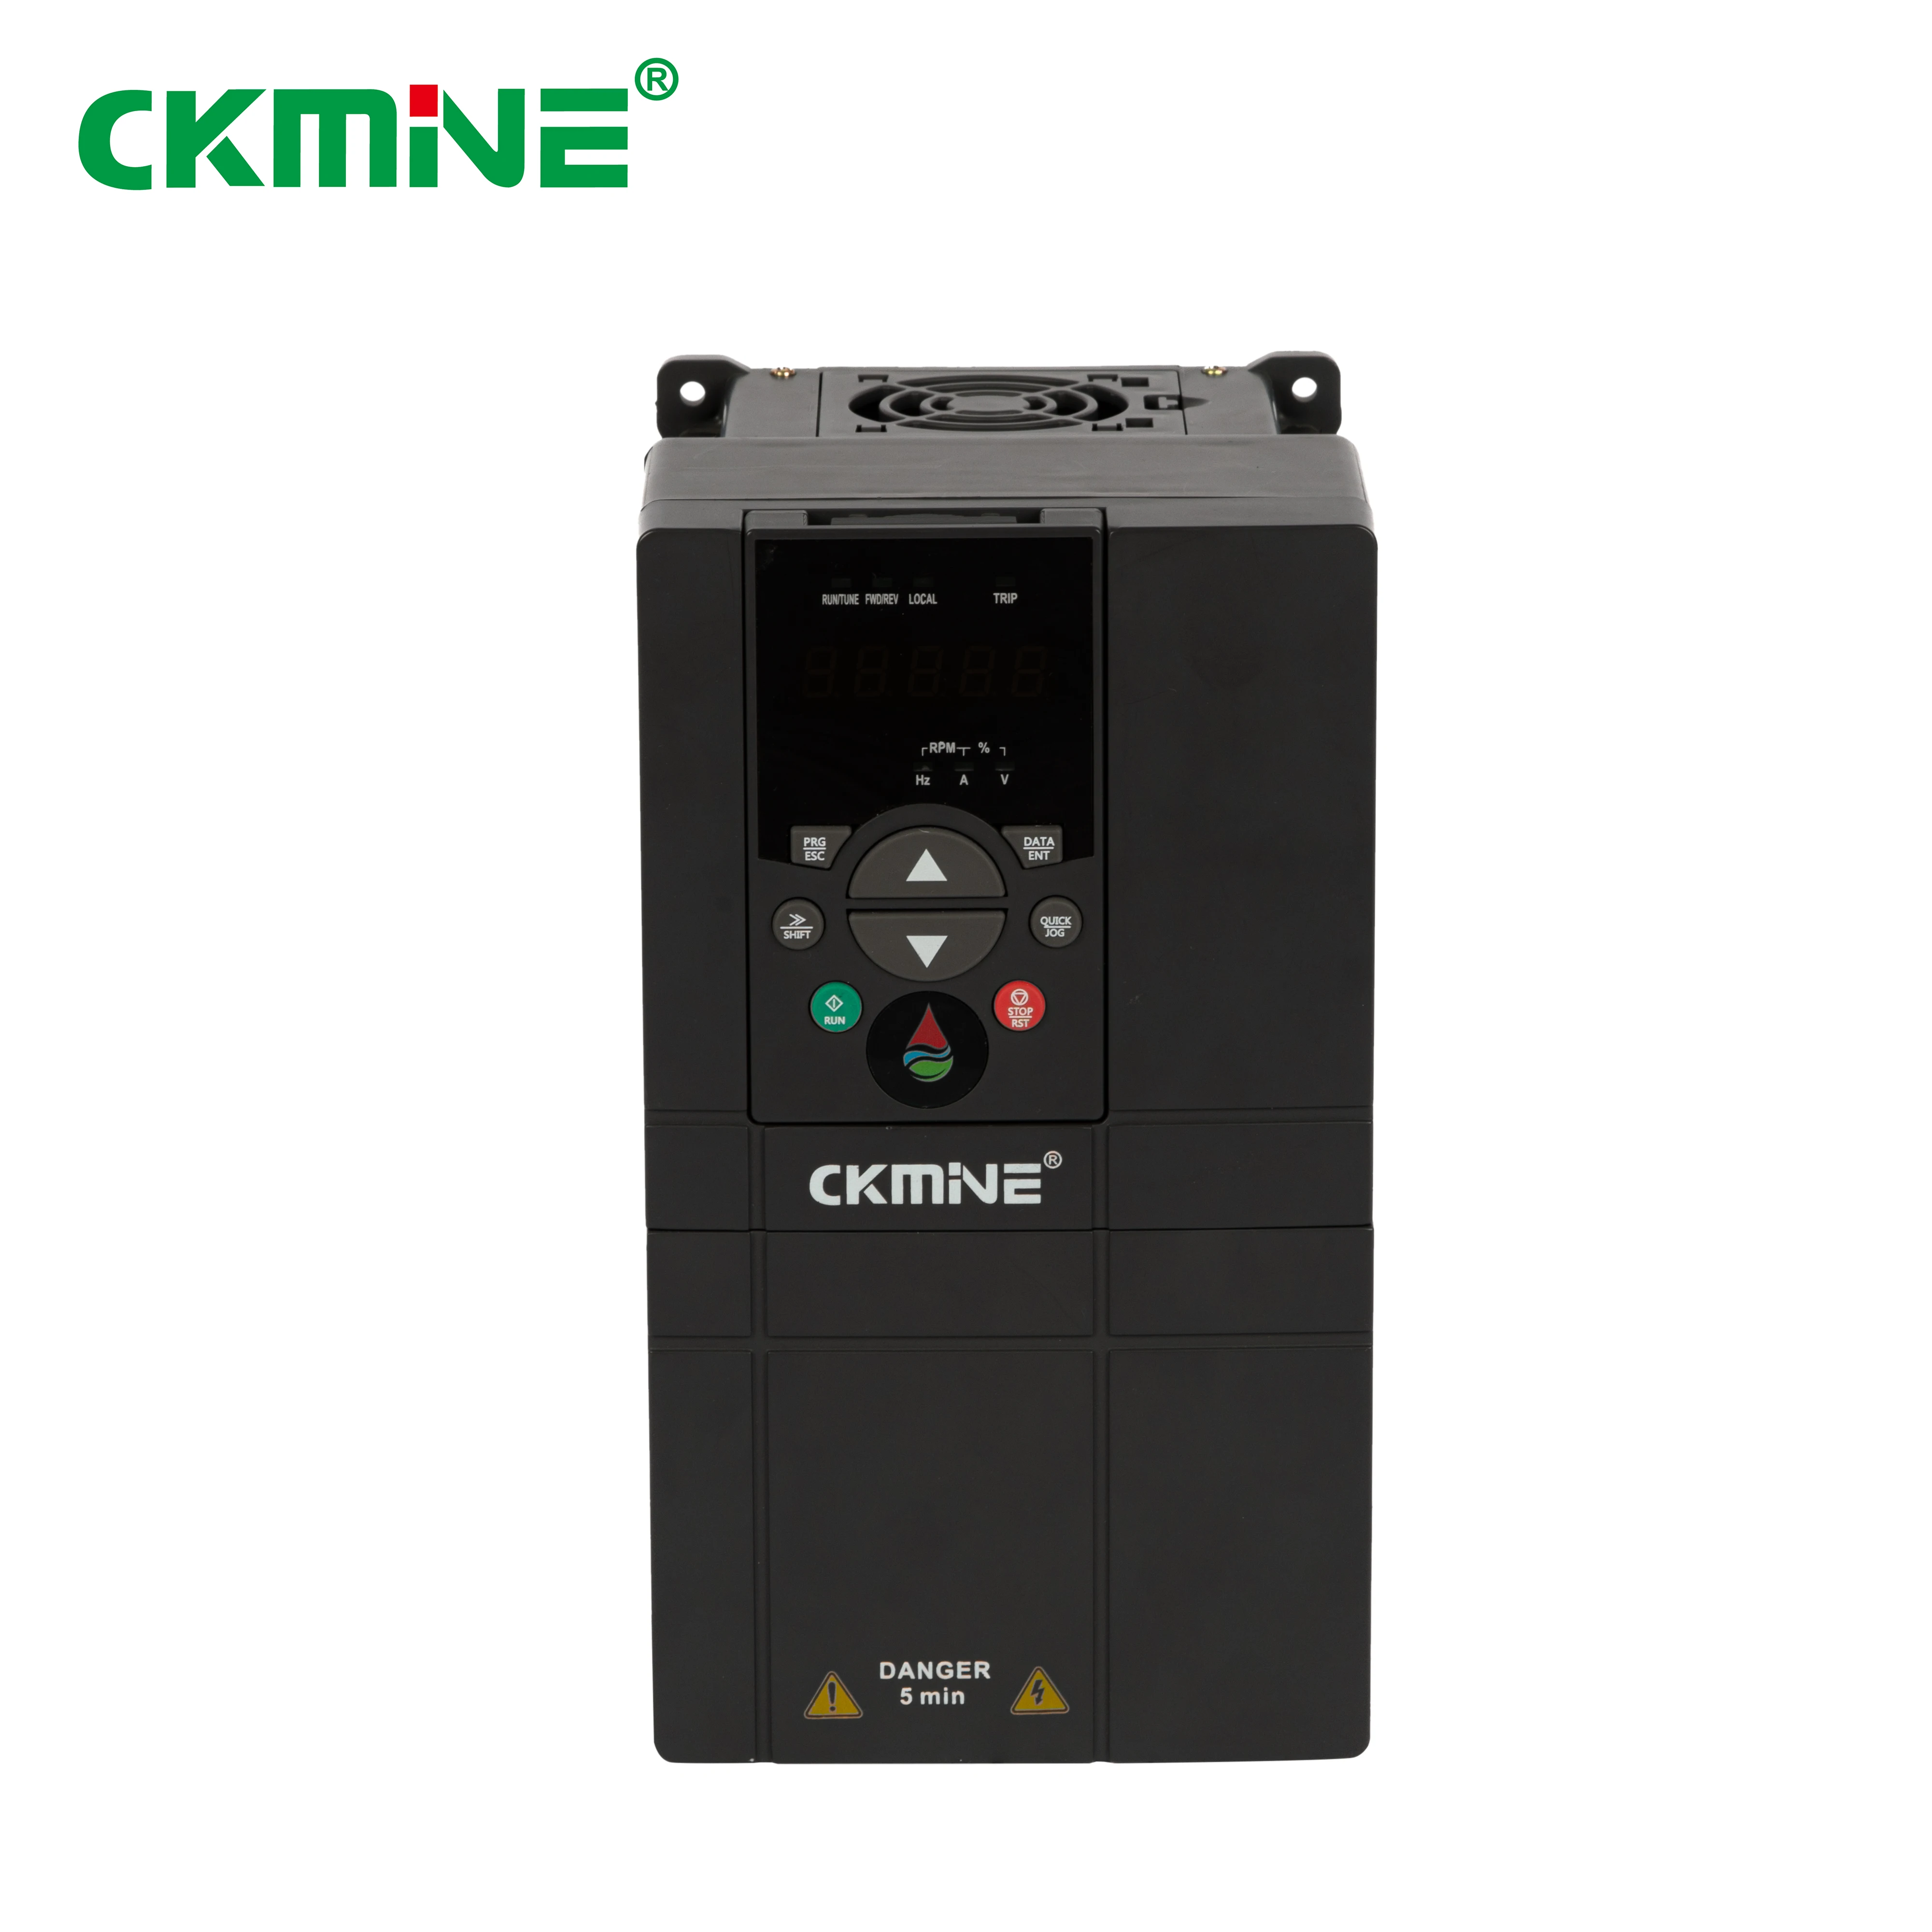 CKMINE Water Pump Inverter Wholesale 99%Efficiency 3 Phase 380V 5.5kw 7.5HP Off Grid MPPT Solar Energy System Dc to Ac VFD